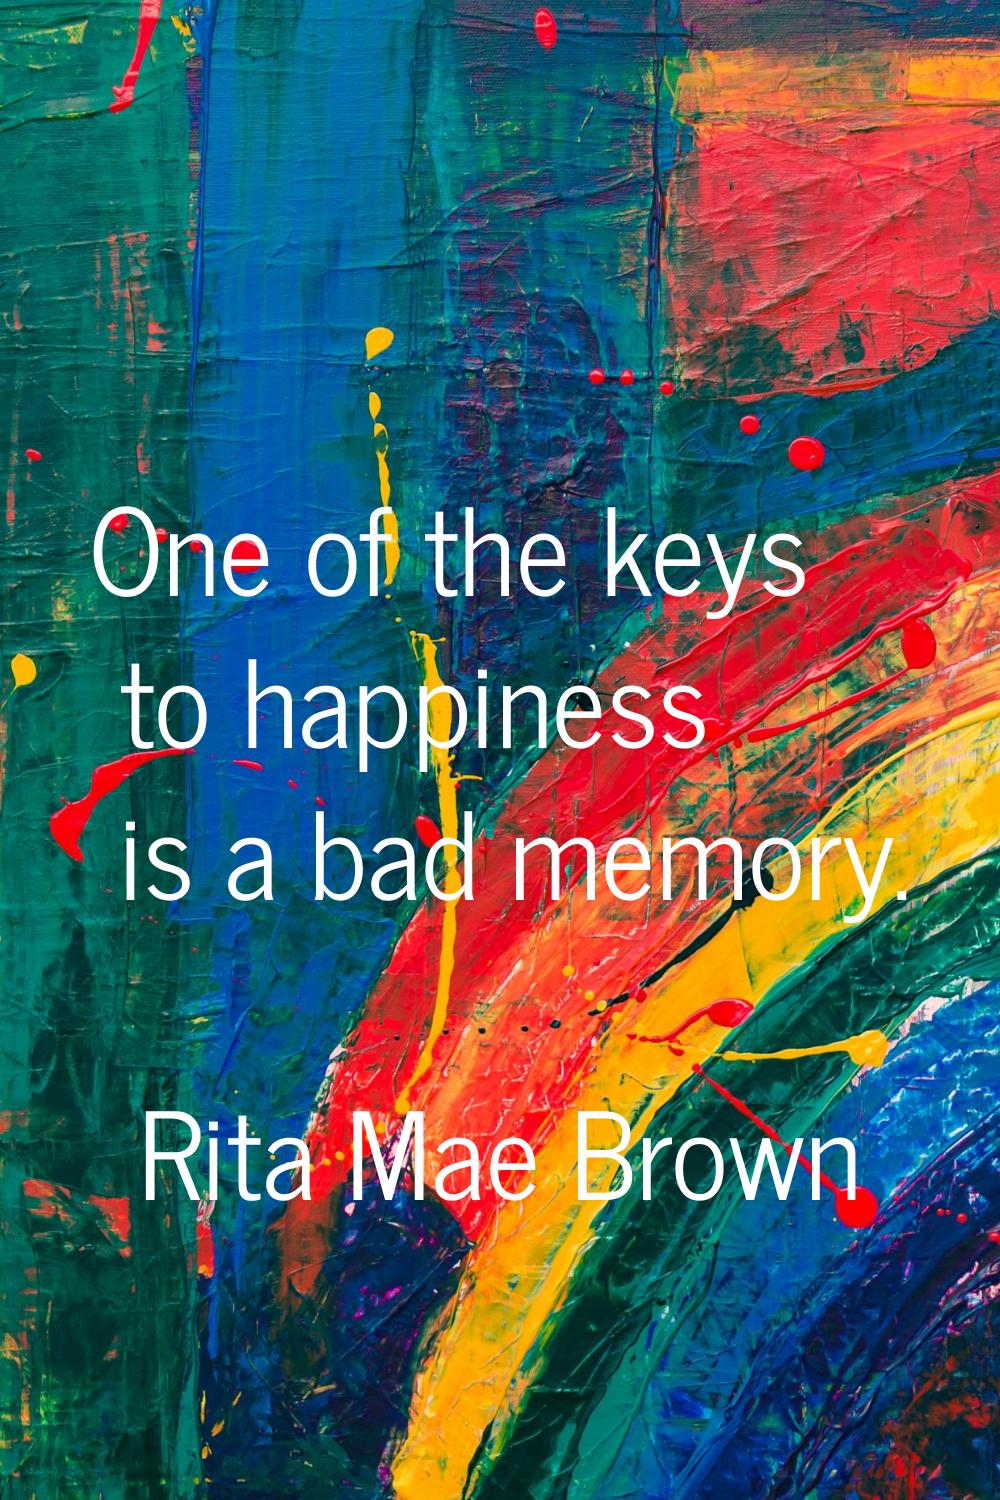 One of the keys to happiness is a bad memory.